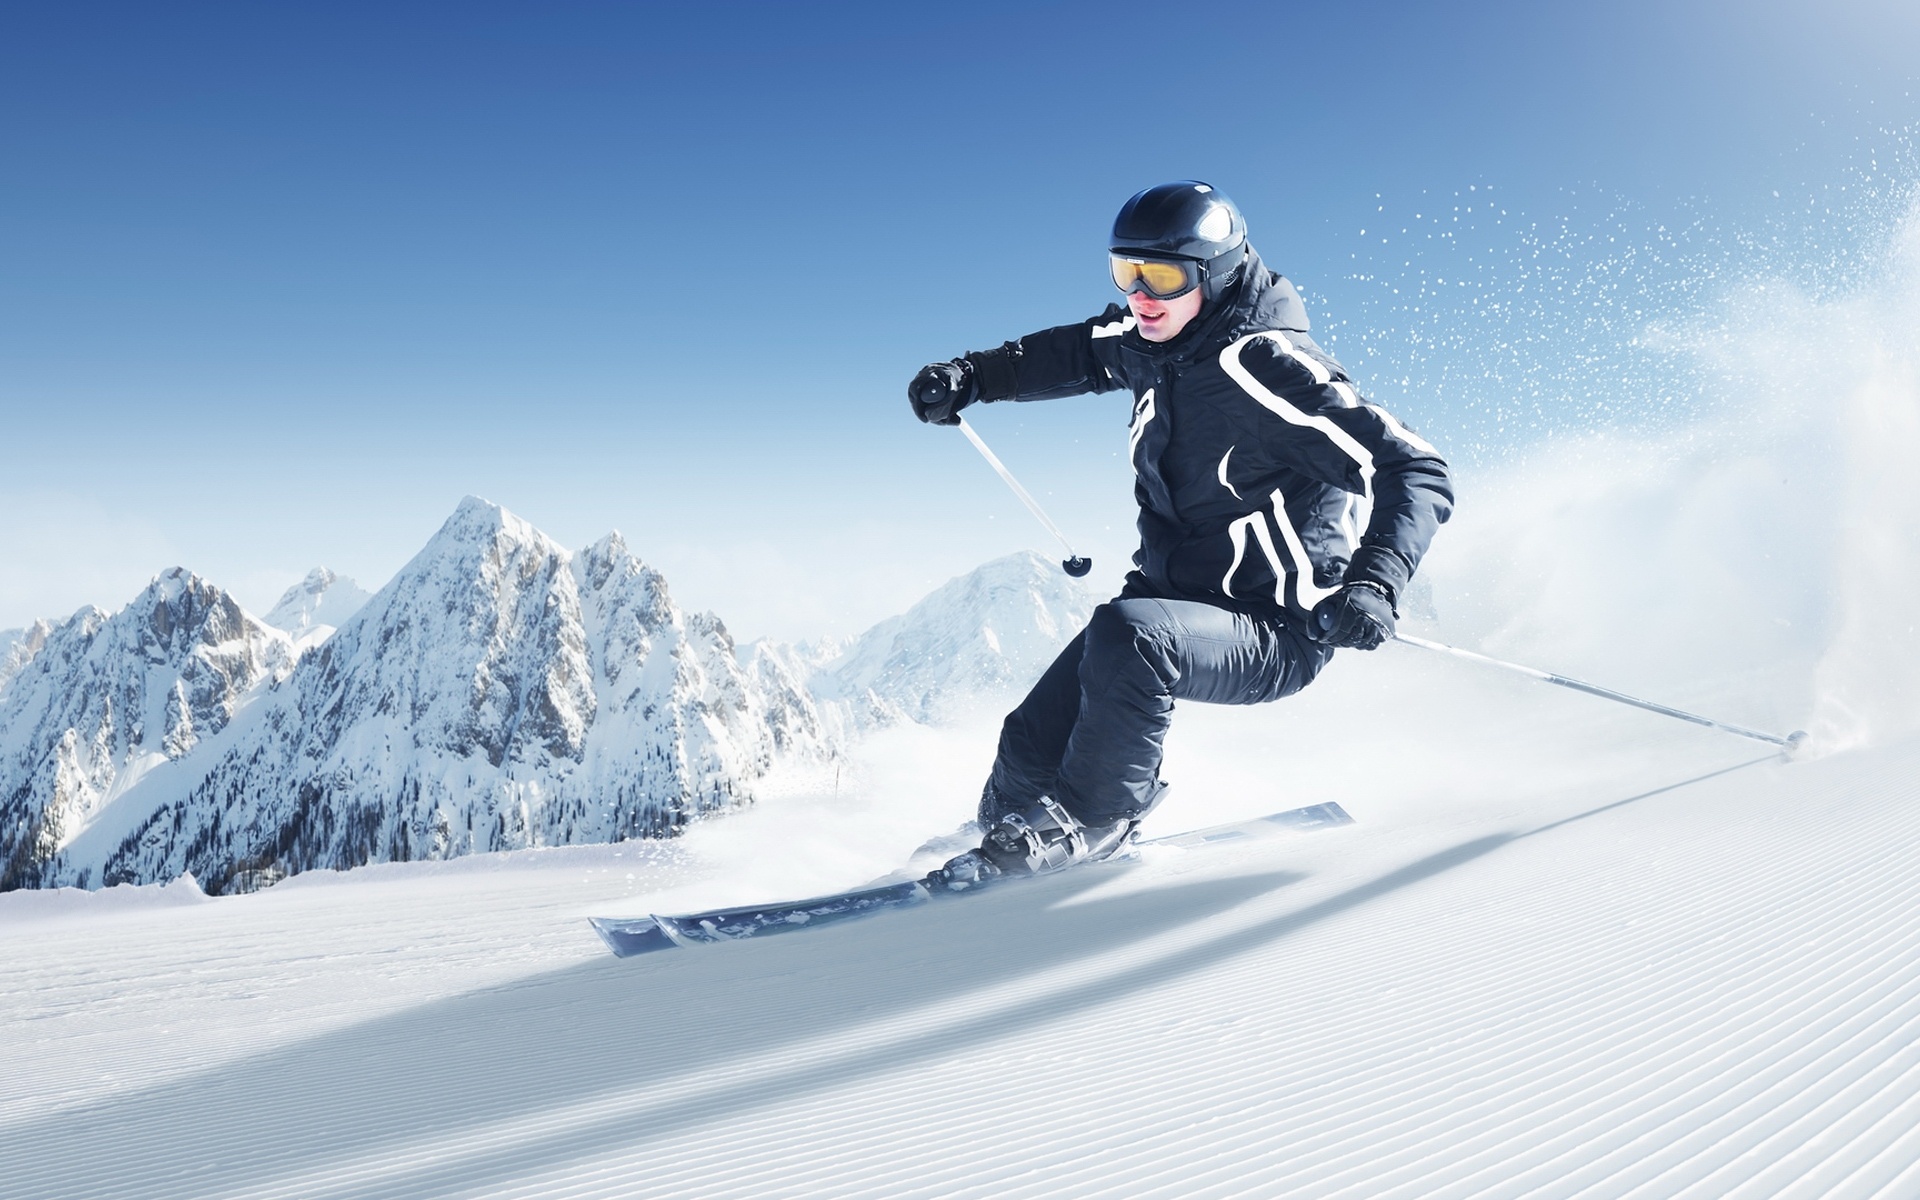 Skiing: Downhill in a wavy course, Gliding on snow, Alpine skiing, Slalom. 1920x1200 HD Background.